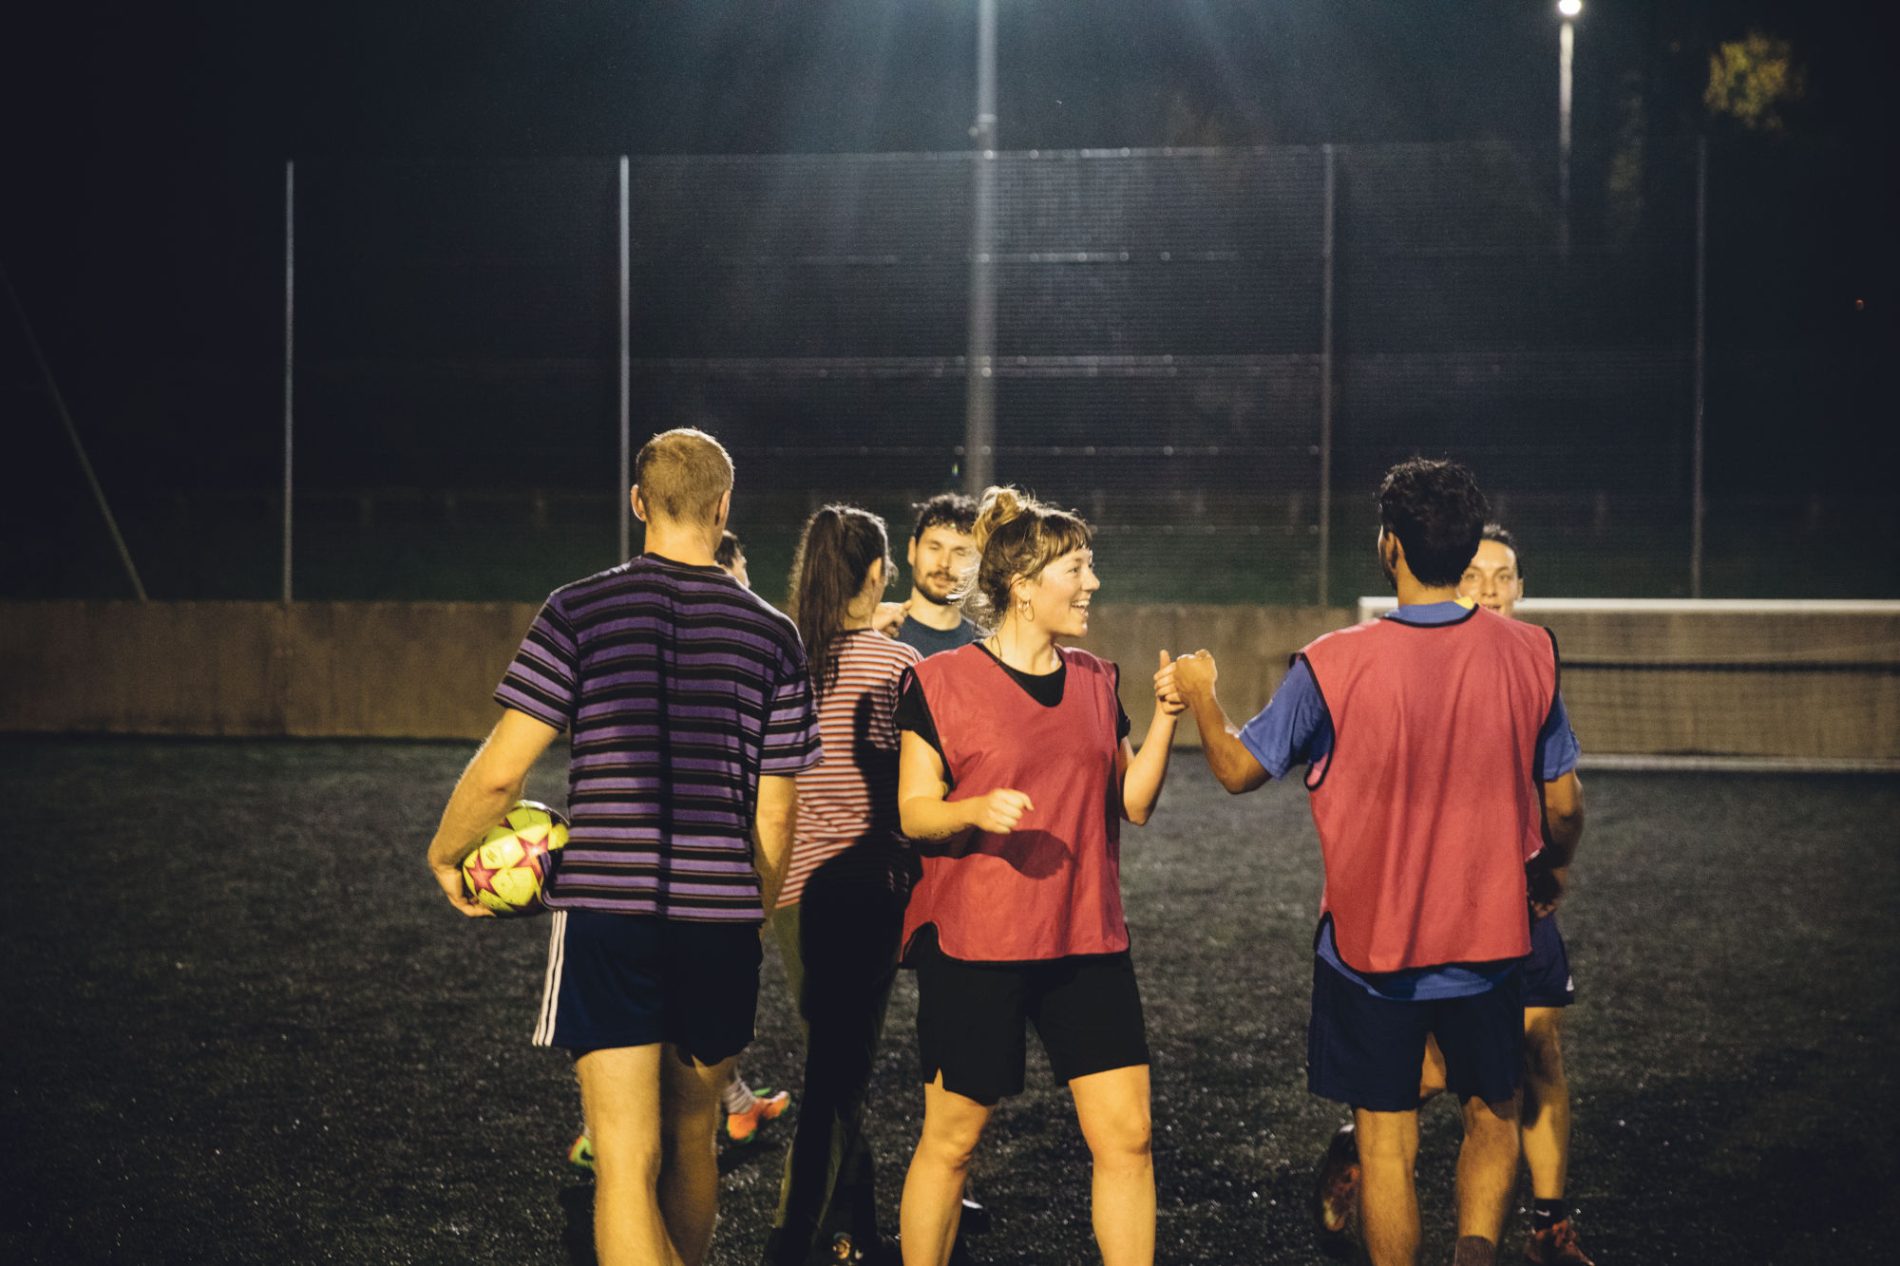 A group of mixed gender football players exchange fist bumps at the end of match on an autumnal evening.